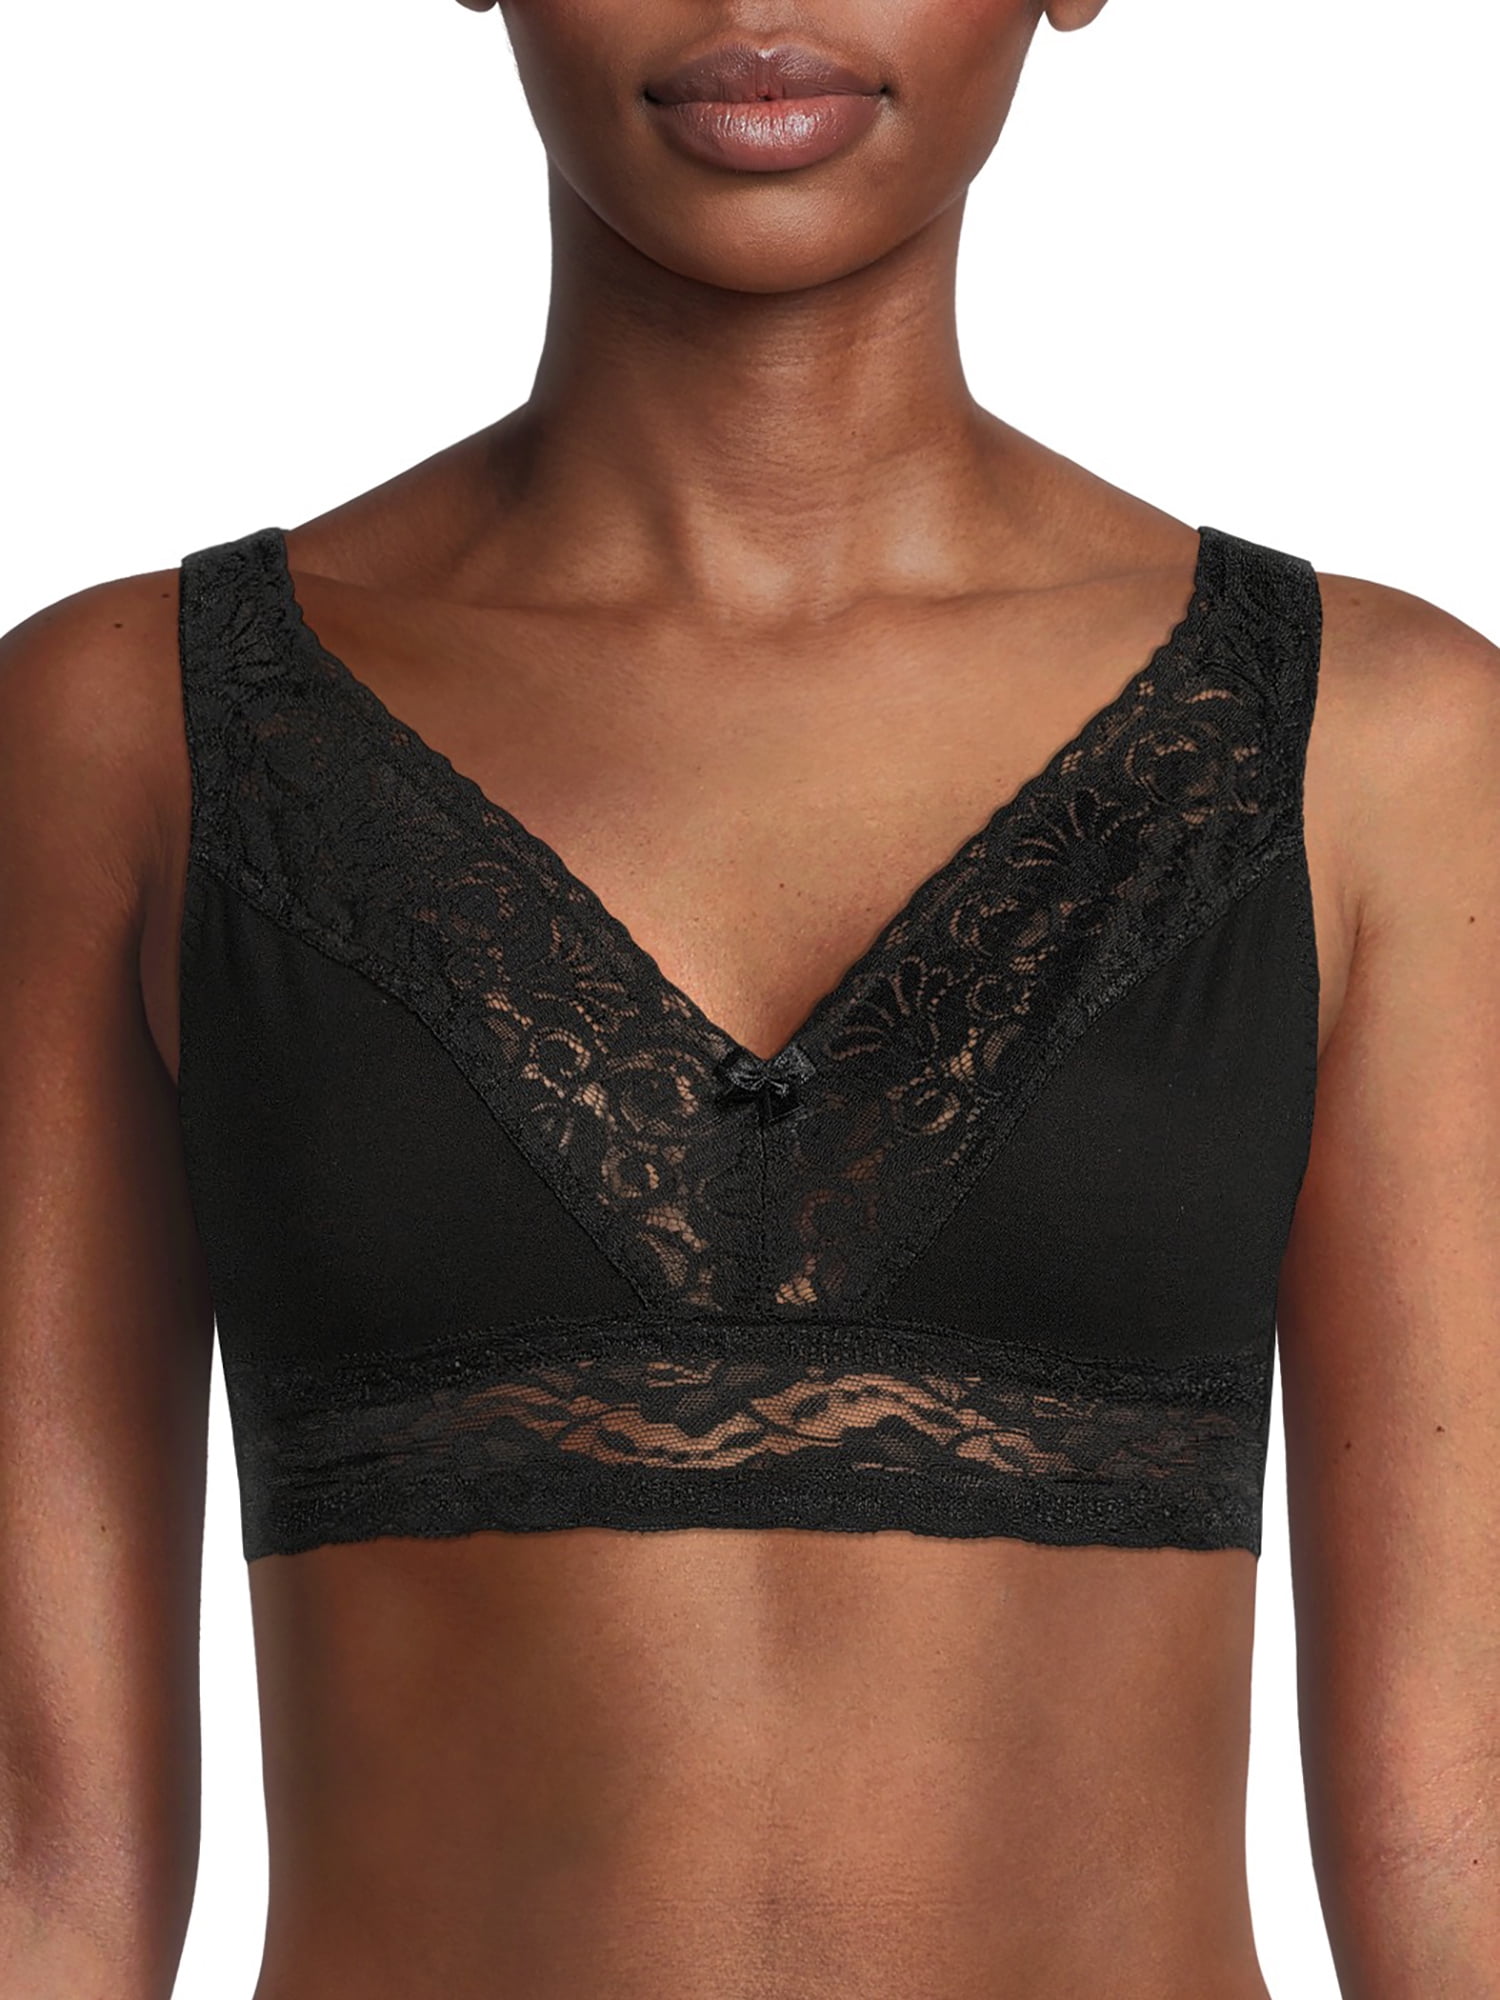 Wynette by Valmont Back Hook Soft Cup Super Comfy Leisure Bra 